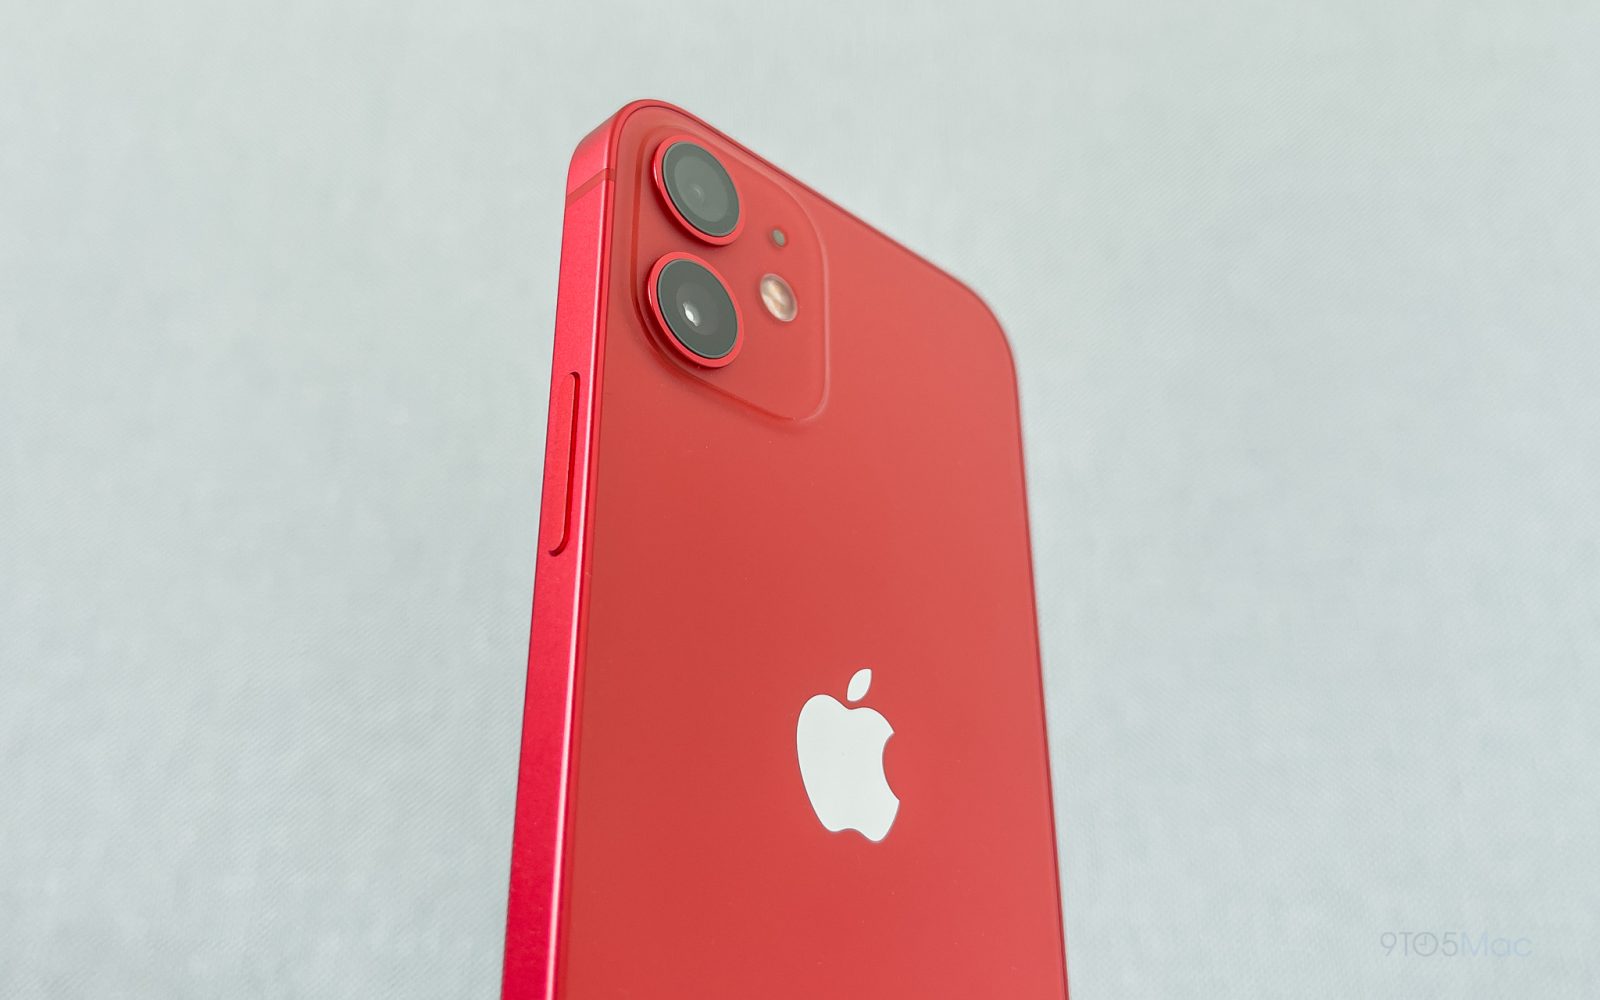 Iphone 16 reportedly getting vertically aligned cameras similar to iphone